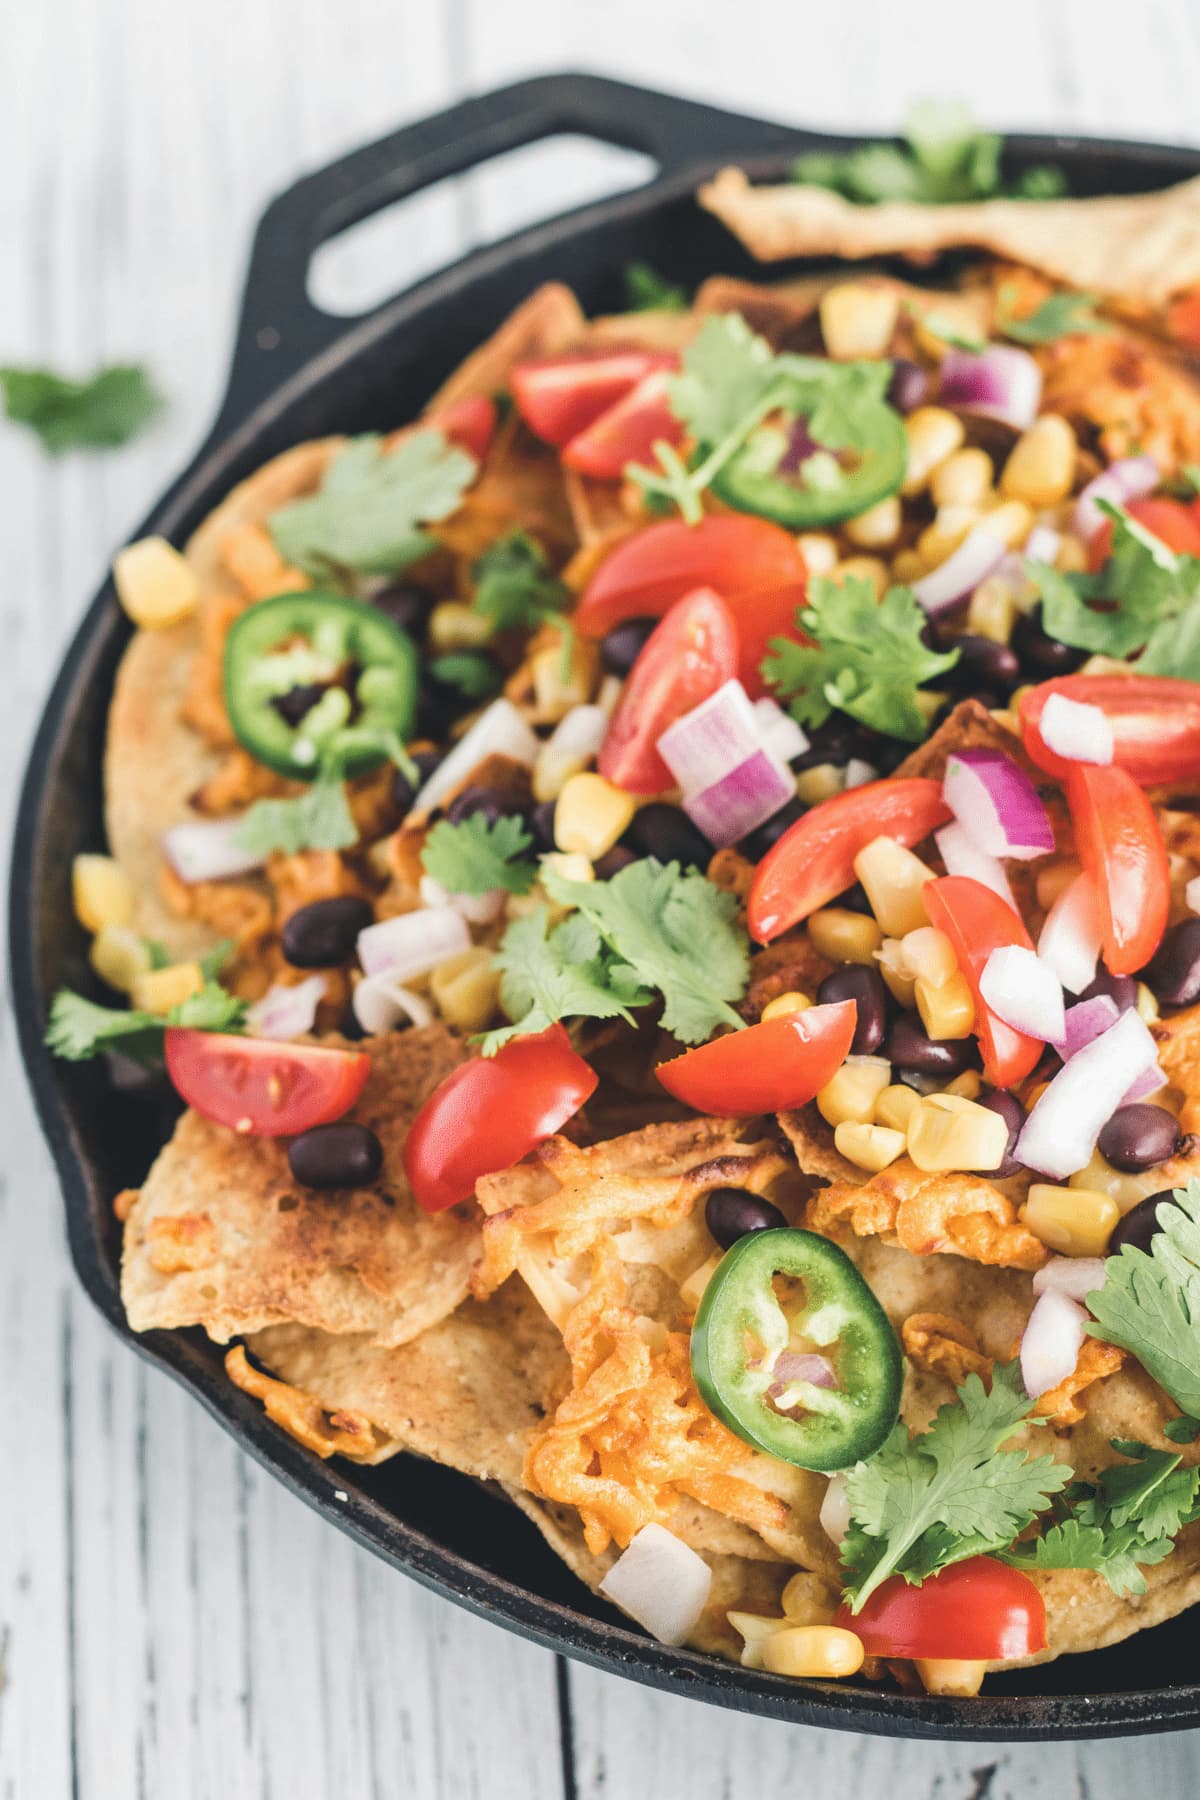 A skillet with fully loaded vegan nachos.